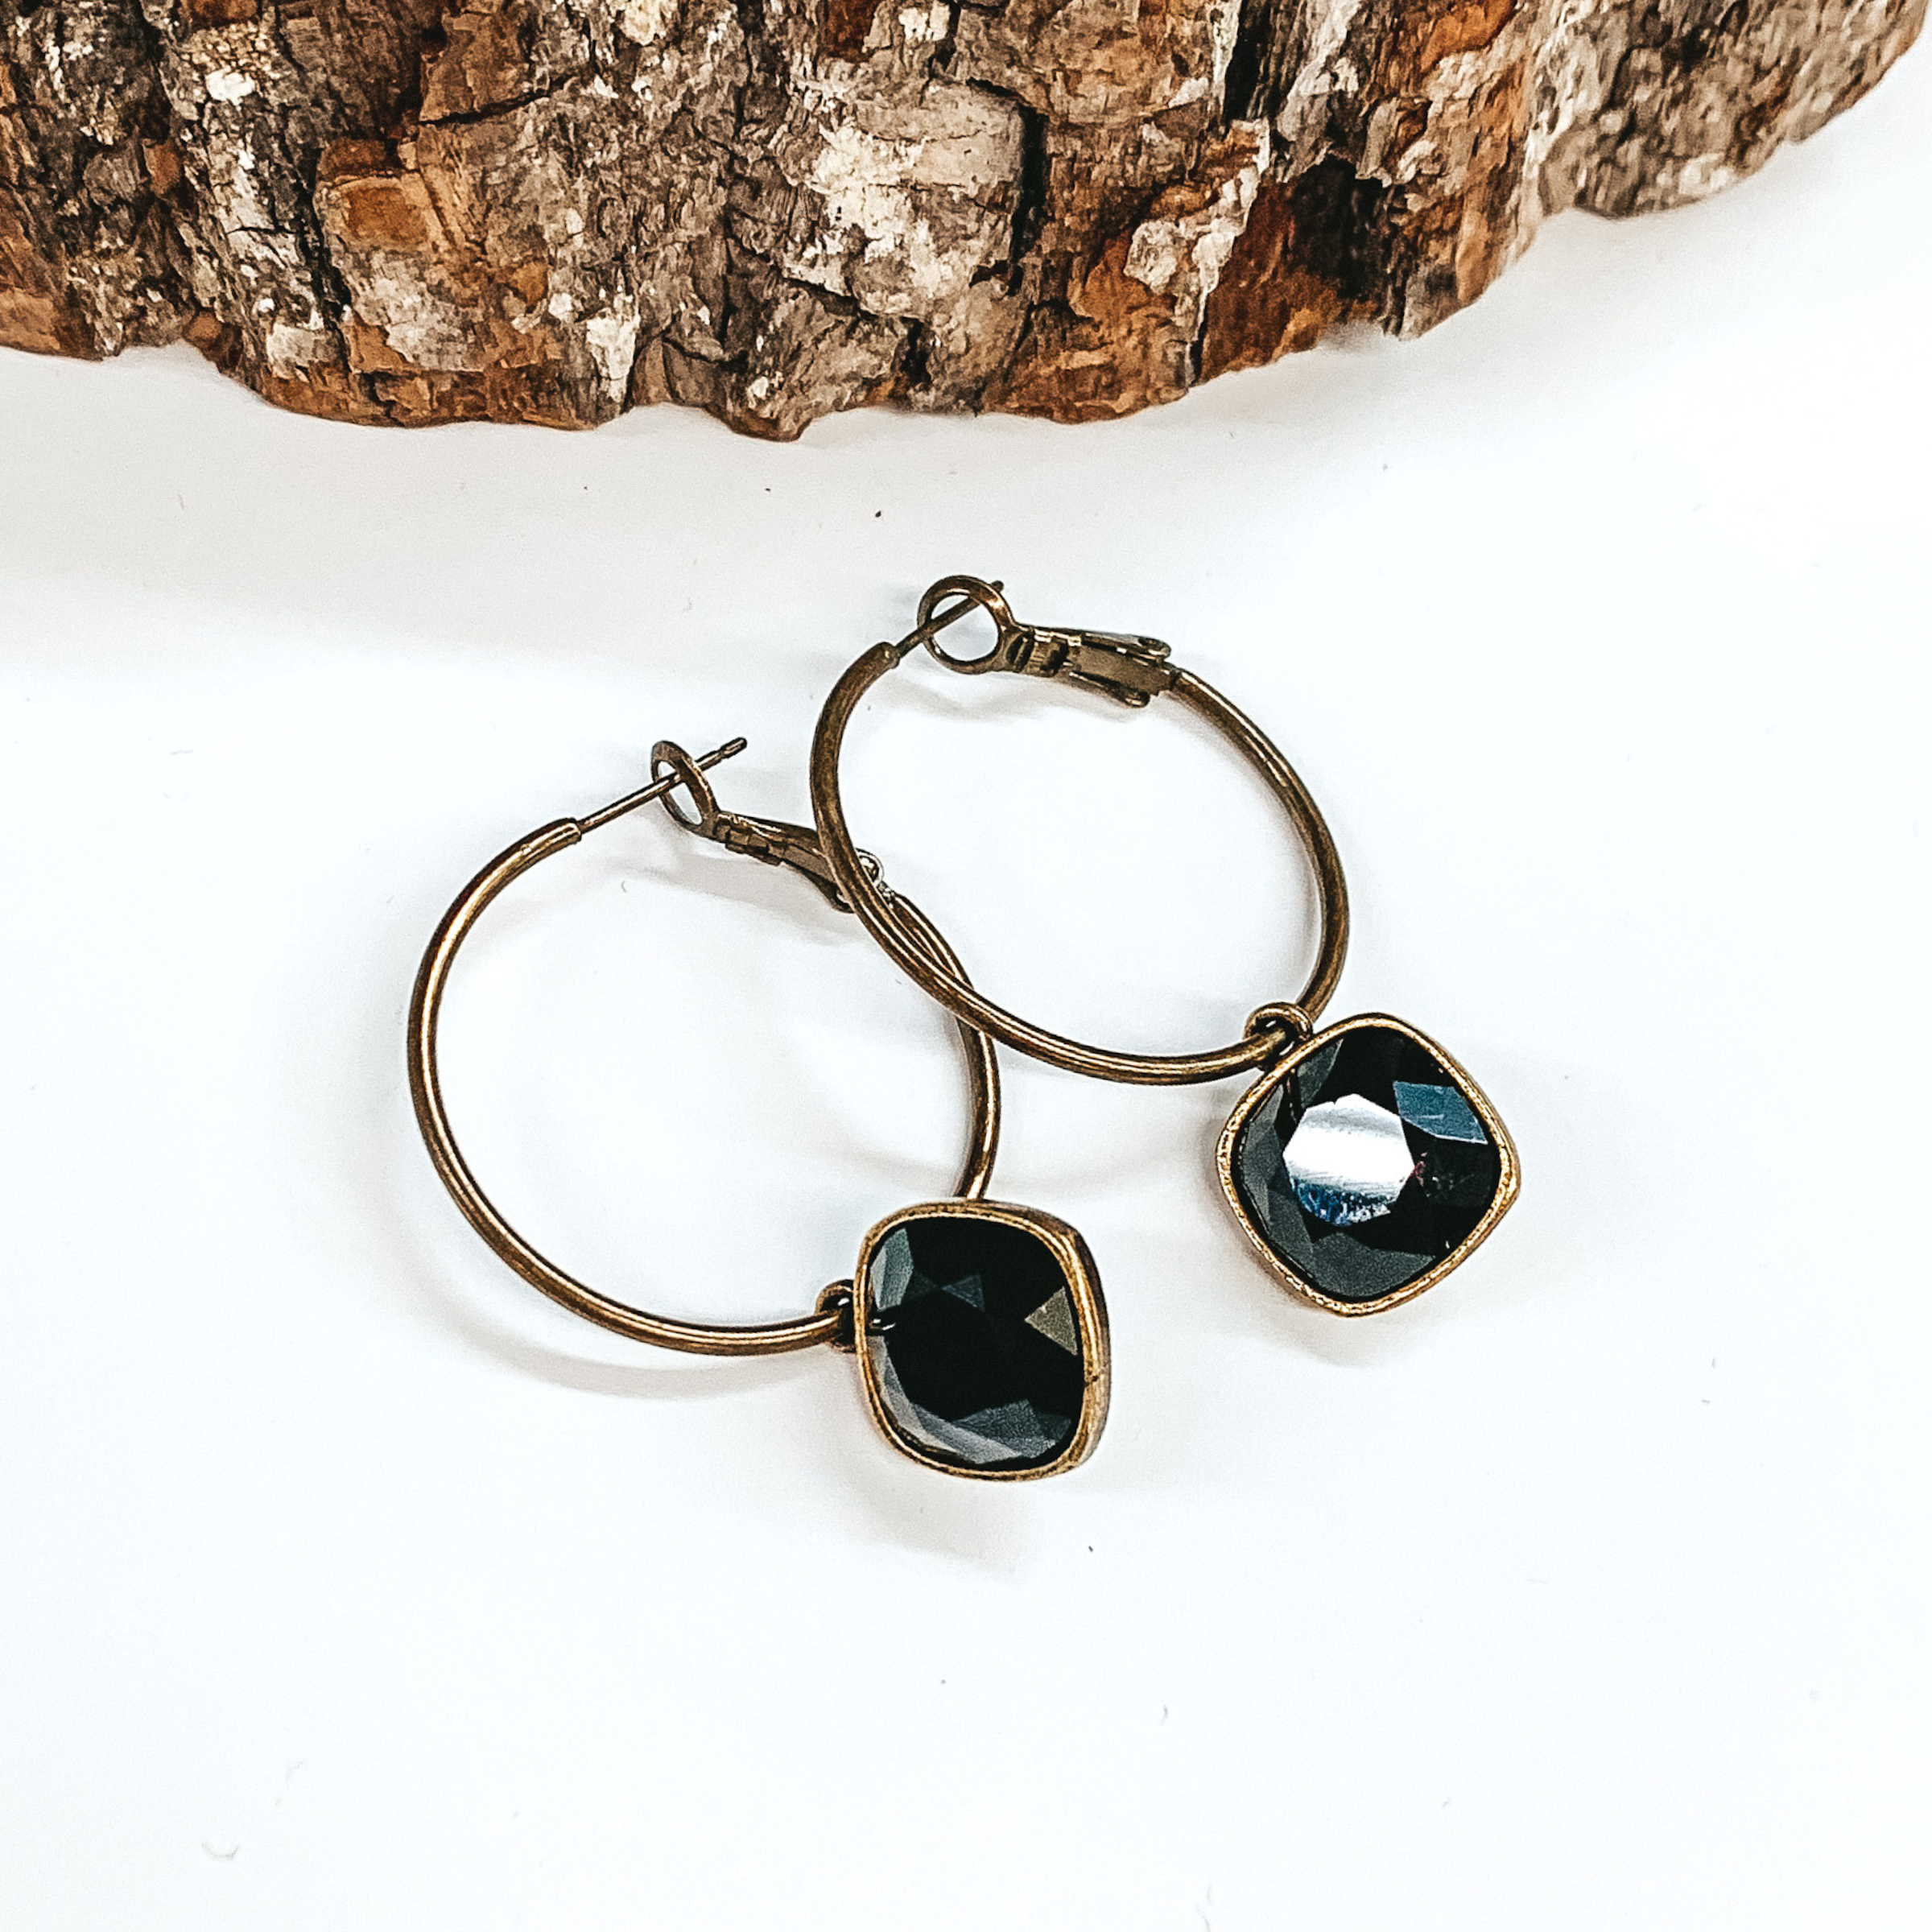 Two bronze hoop earrings with a square black crystal. These earrings are pictured on a white background with a piece of wood at the top.